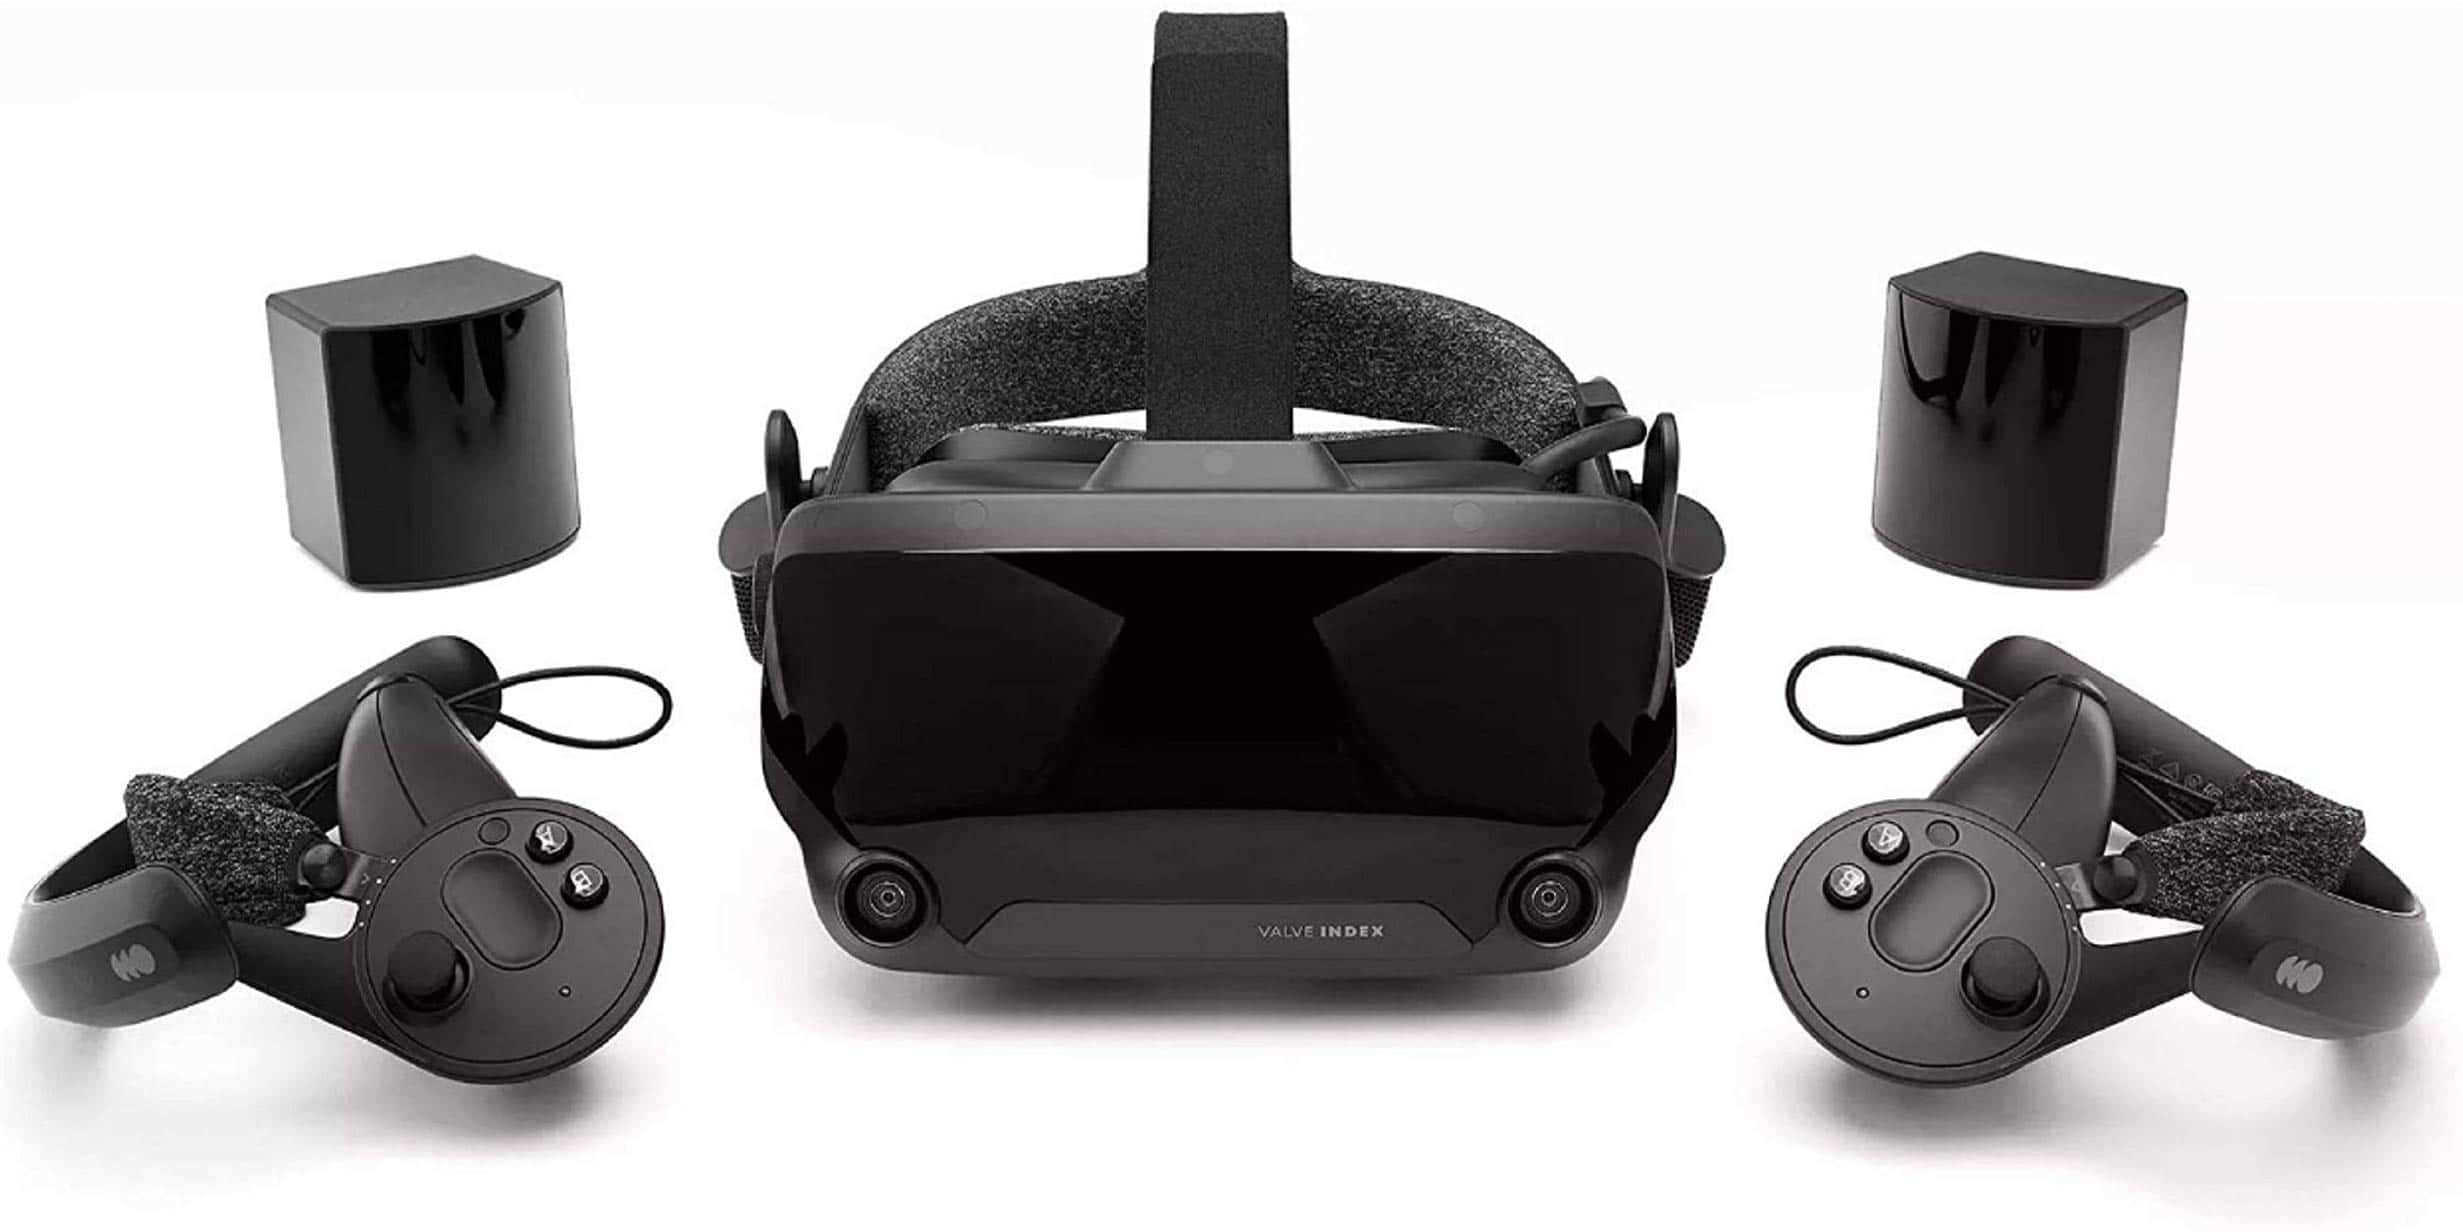 Valve Index ReviewIs it really worth the money? Virtual Reality hotspot